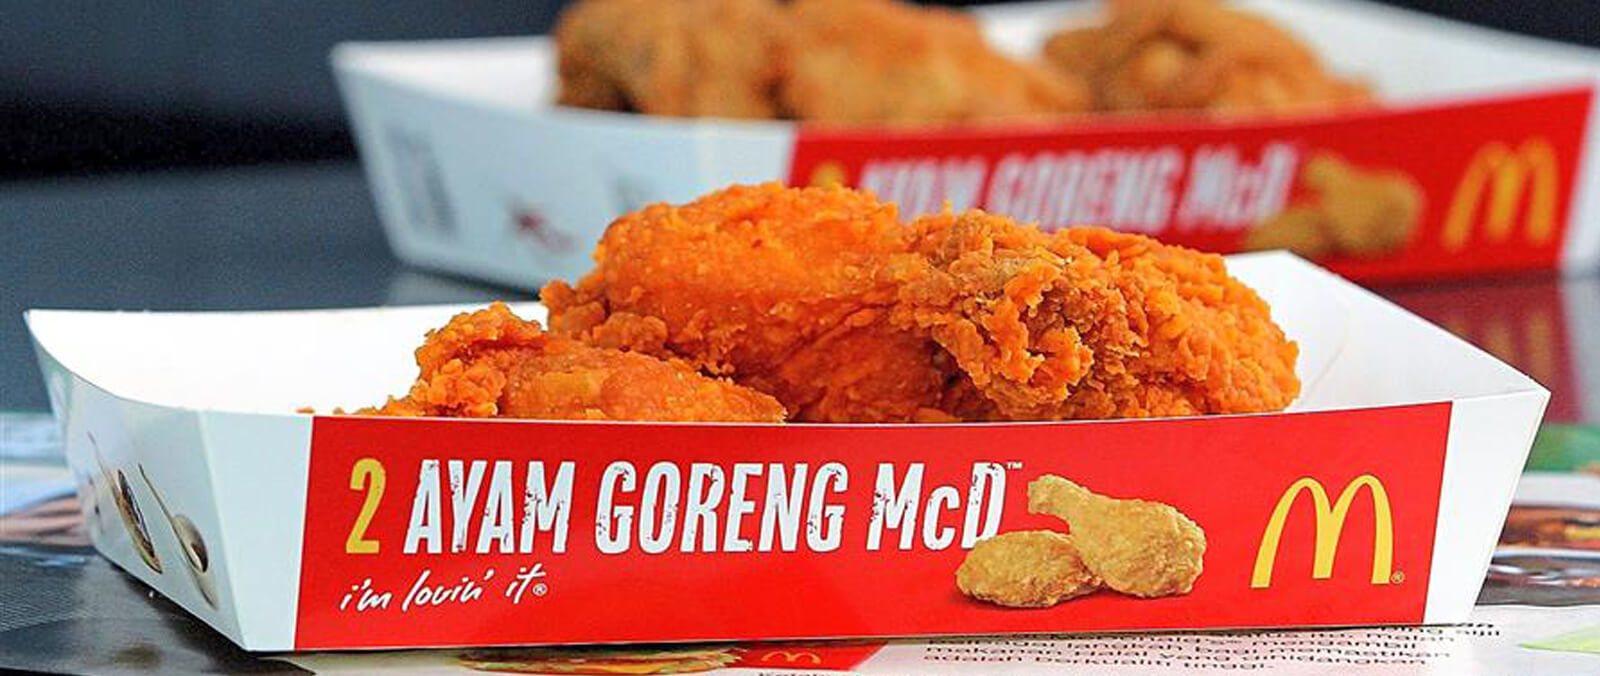 Image result for ayam goreng spicy mcd